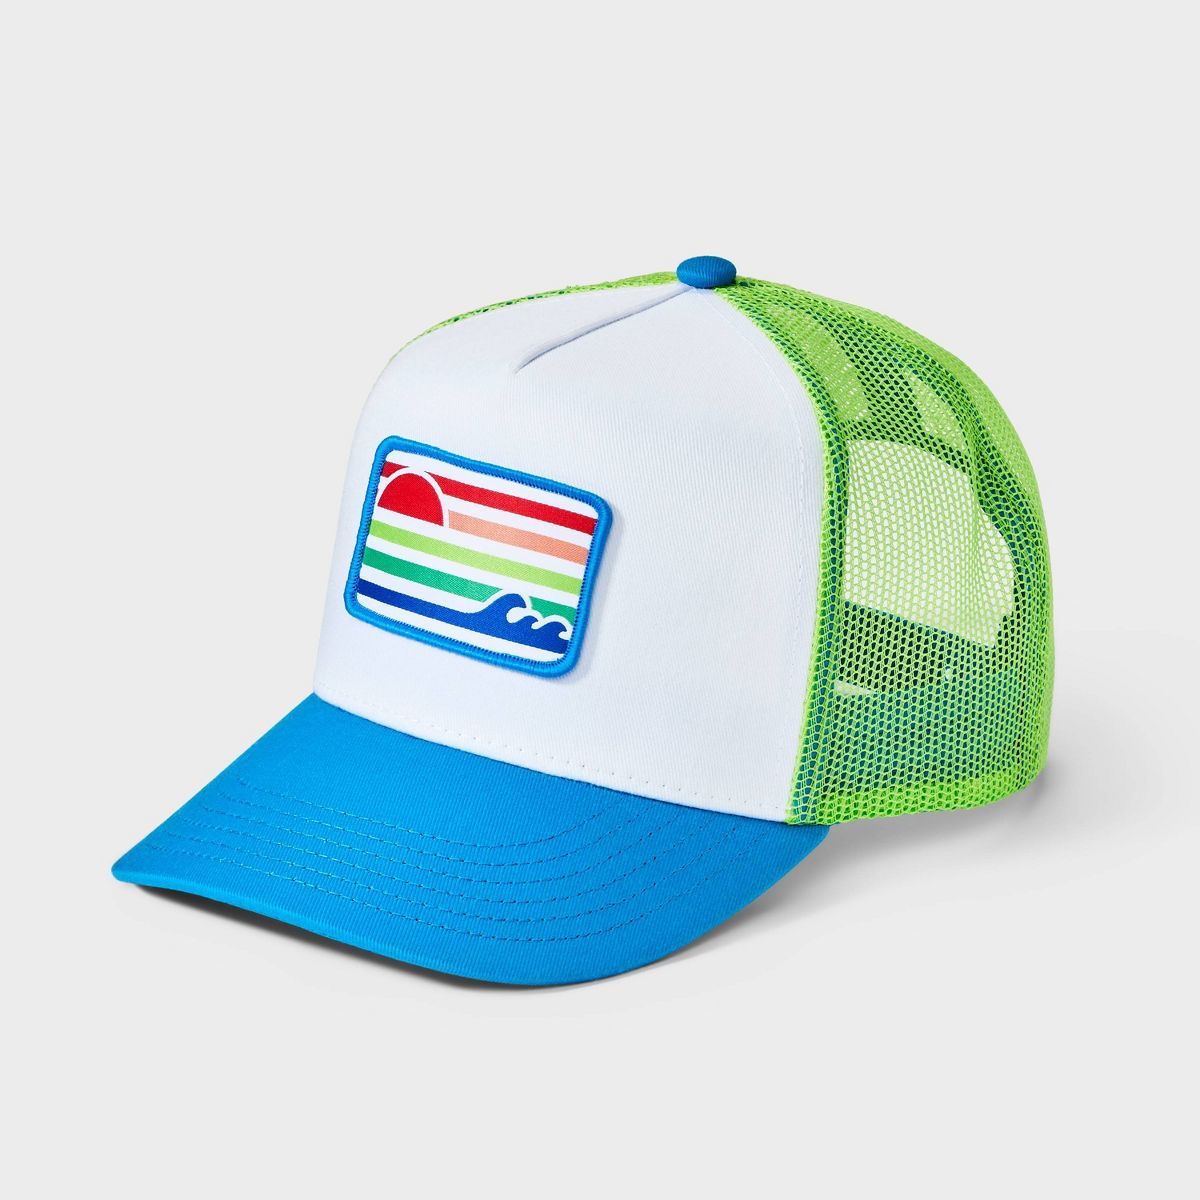 Boys' Trucker Hat with Sunset Patch - Cat & Jack™ Turquoise Blue | Target